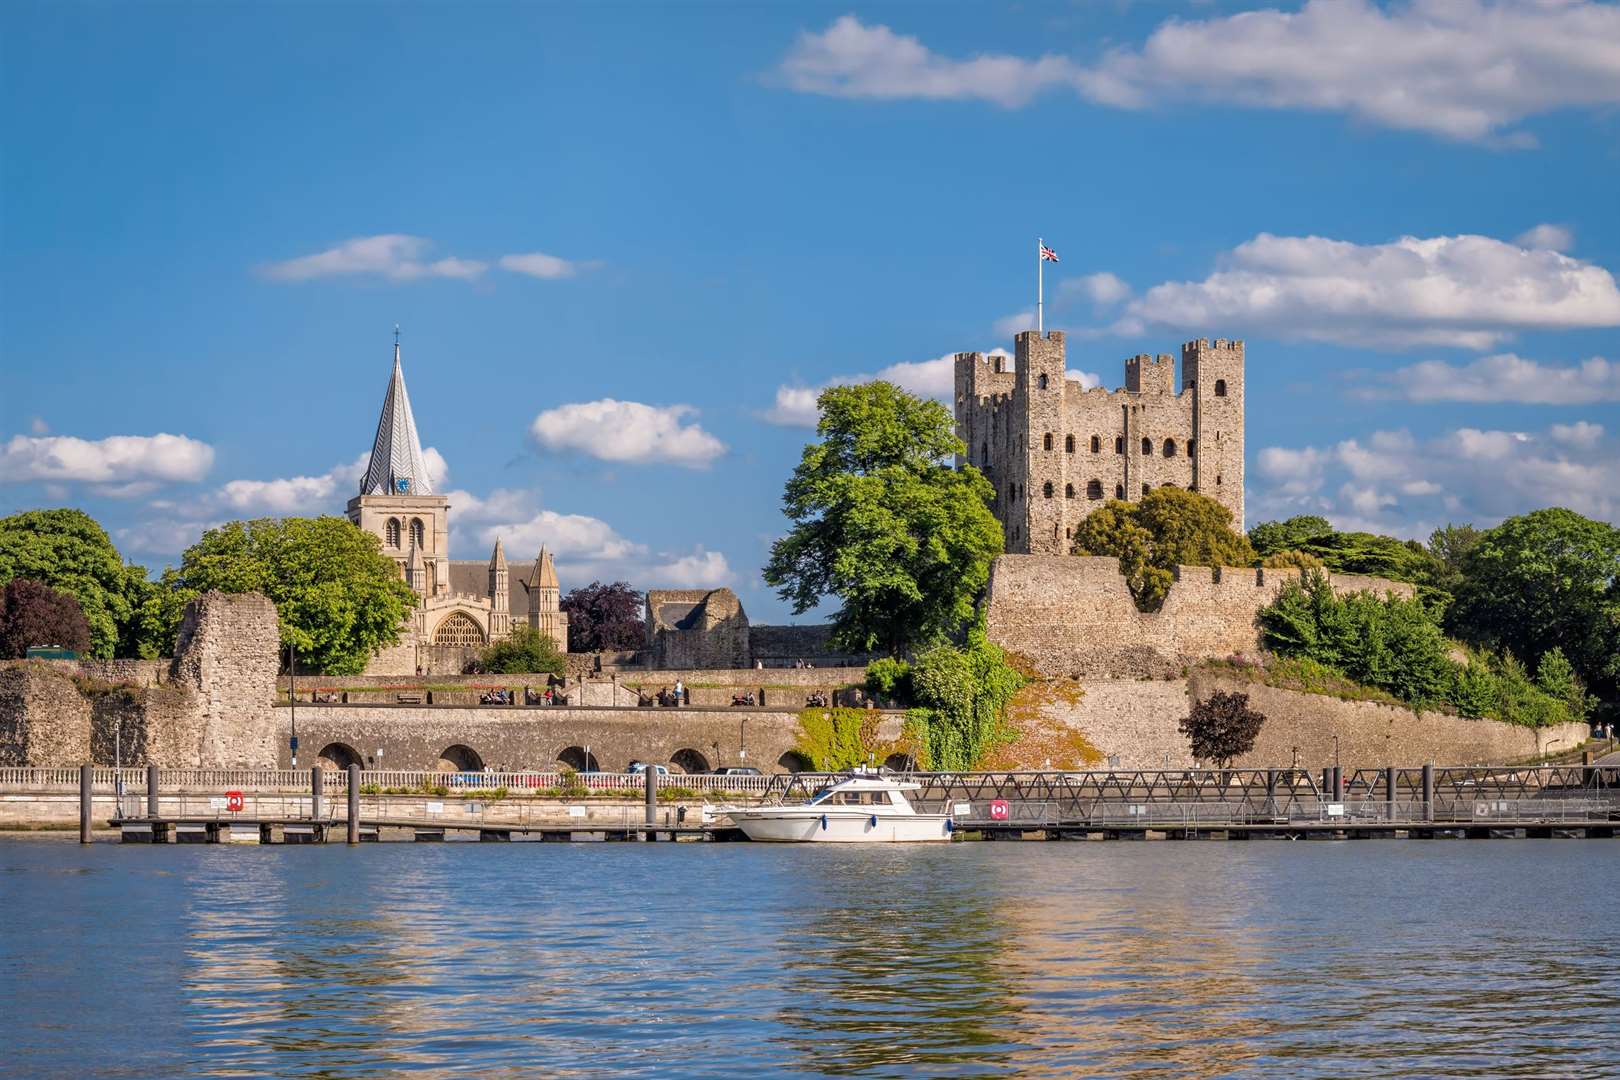 Historical Rochester as seen across river Medway